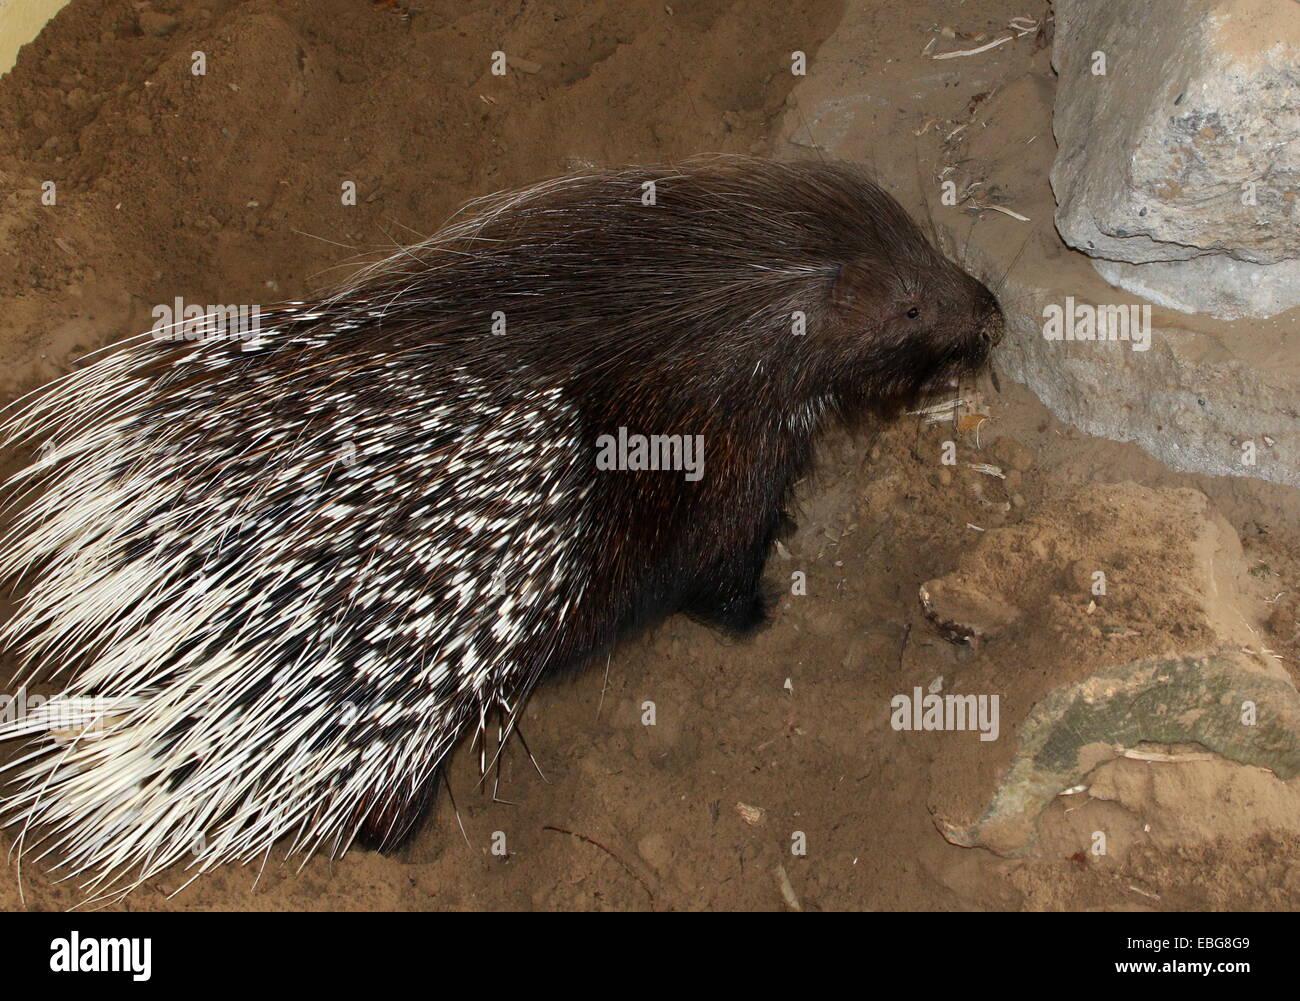 Indian crested porcupine (Hystrix indica) Stock Photo